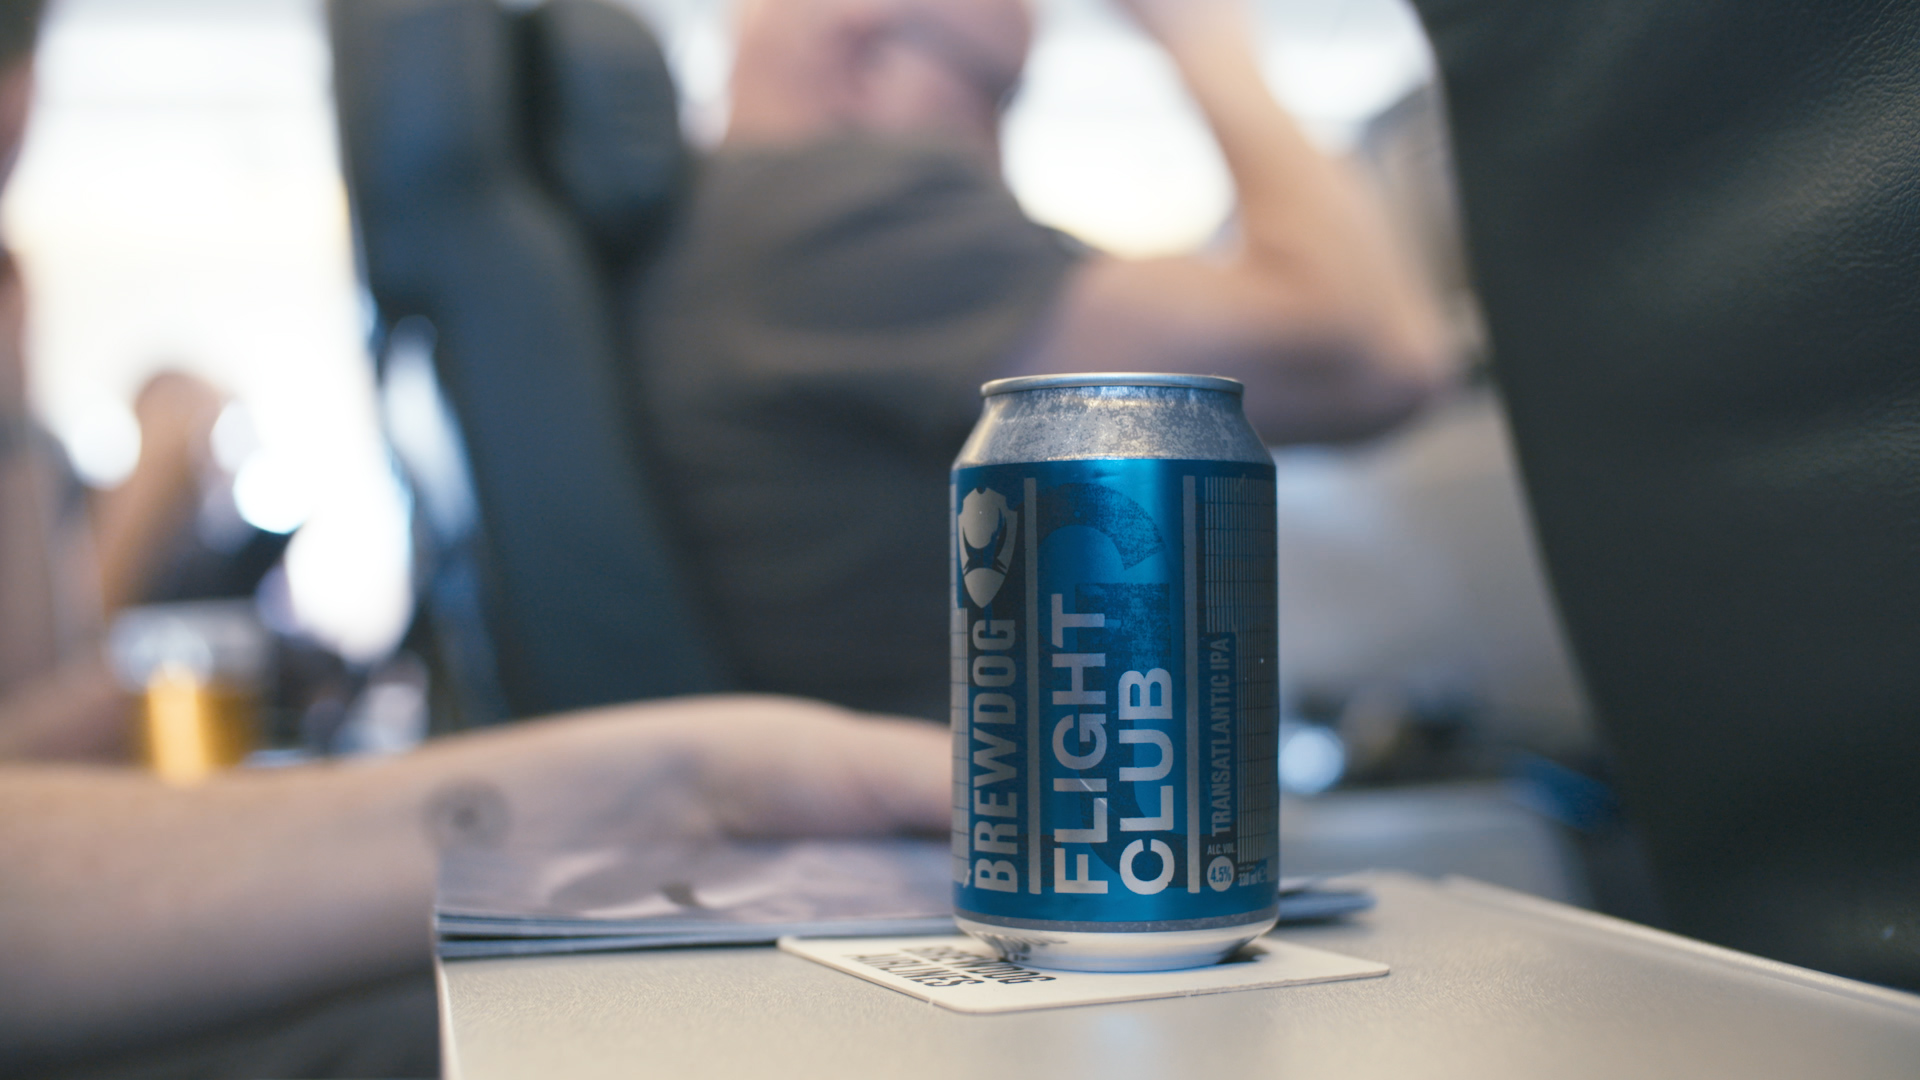 BrewDog Flight Club, a 4.5% IPA brewed specifically for the maiden flight on BrewDog Airlines